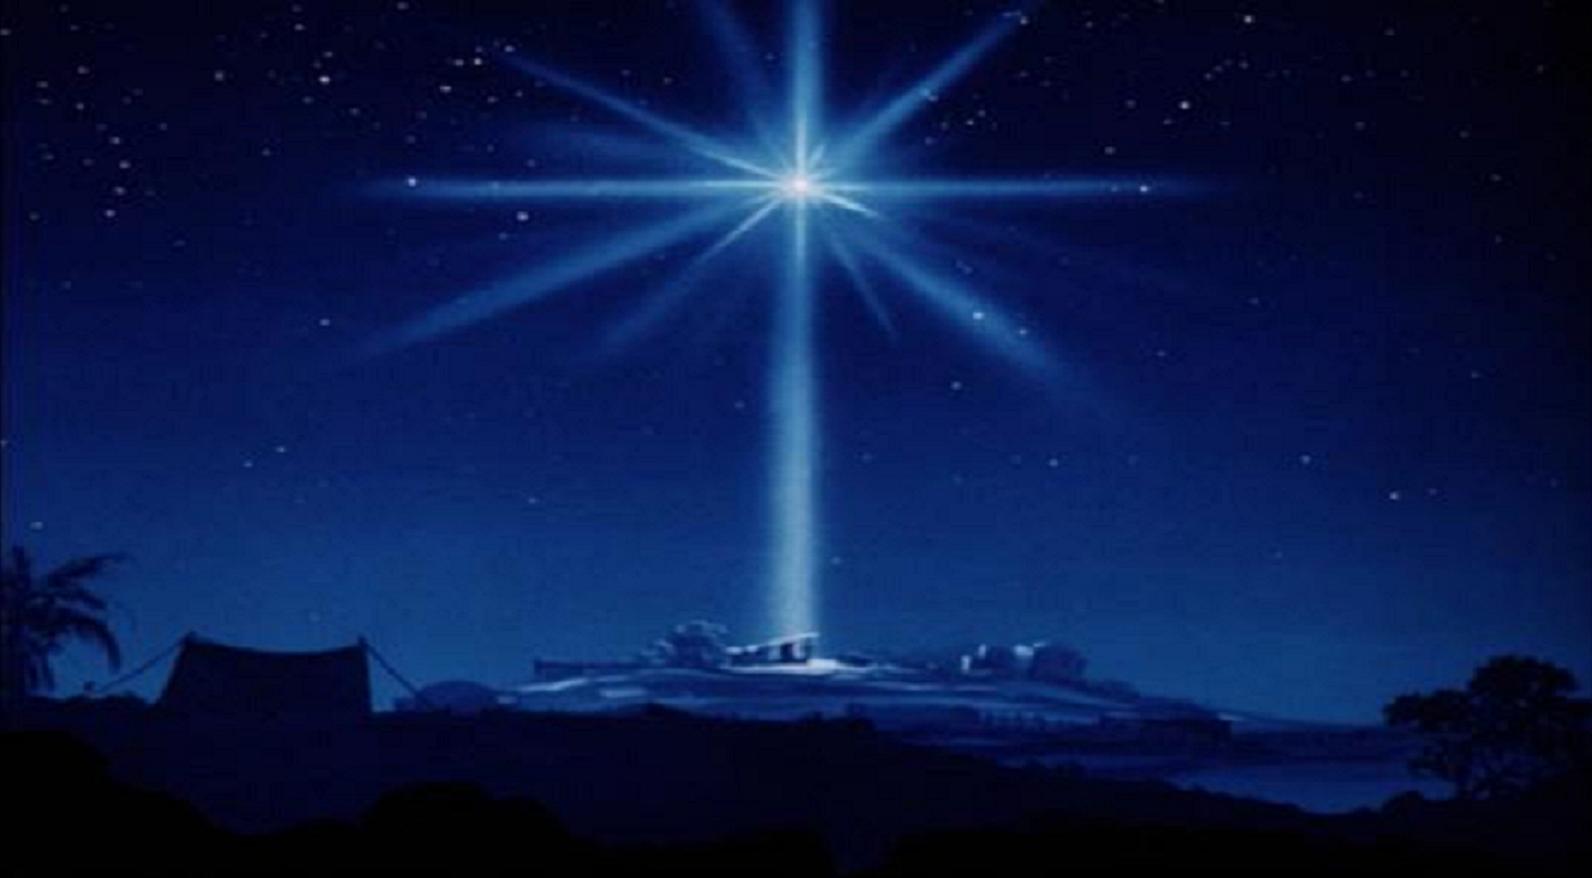 Rare 'Star of Bethlehem' to Appear Dec. 21 Here's What Astronomy Says